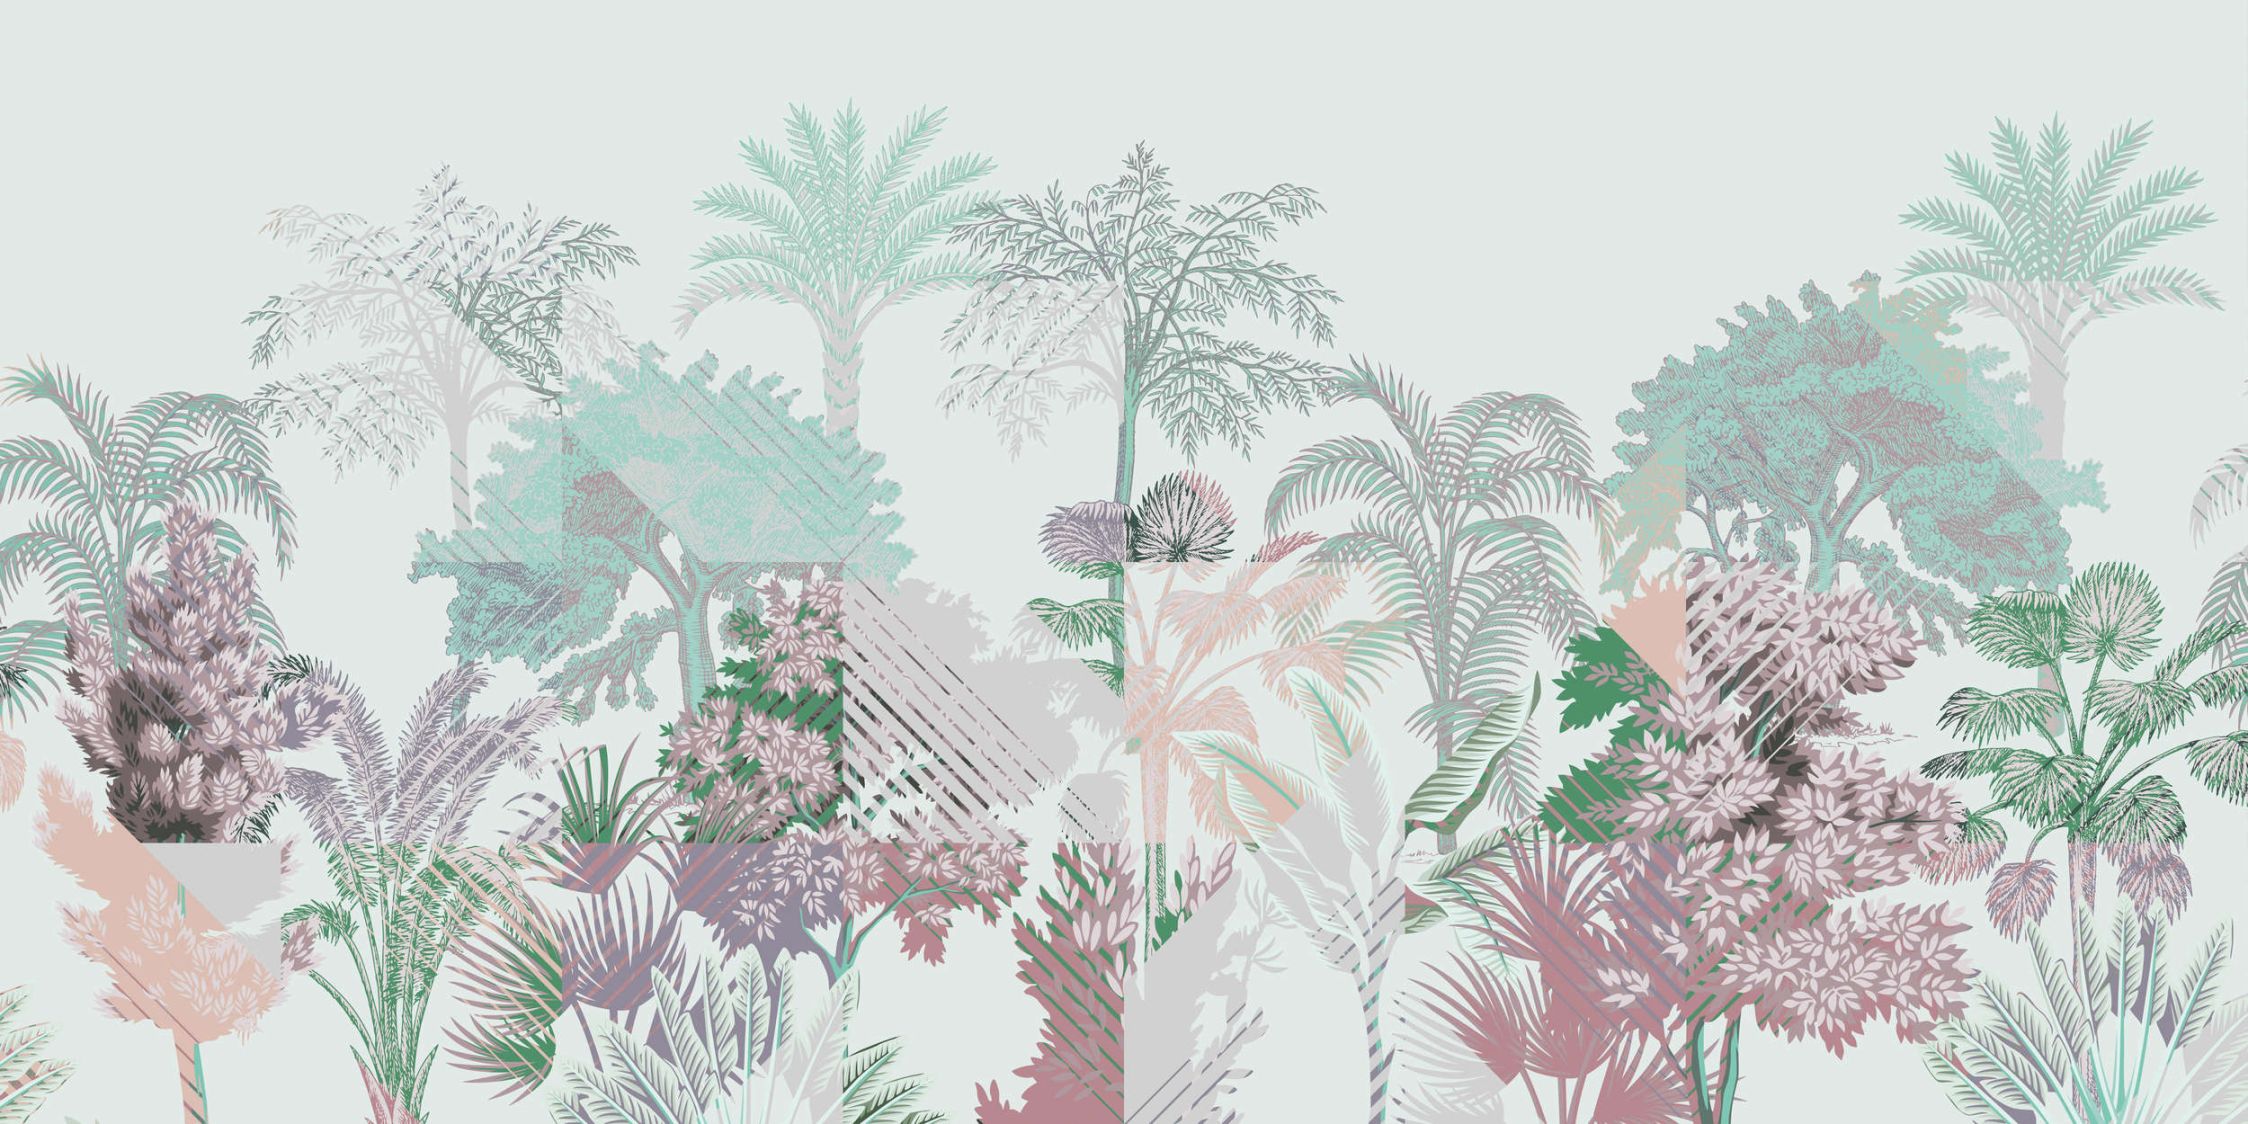             Photo wallpaper »esplanade 1« - Jungle patchwork with bushes - Green, Pink | Matte, Smooth non-woven fabric
        